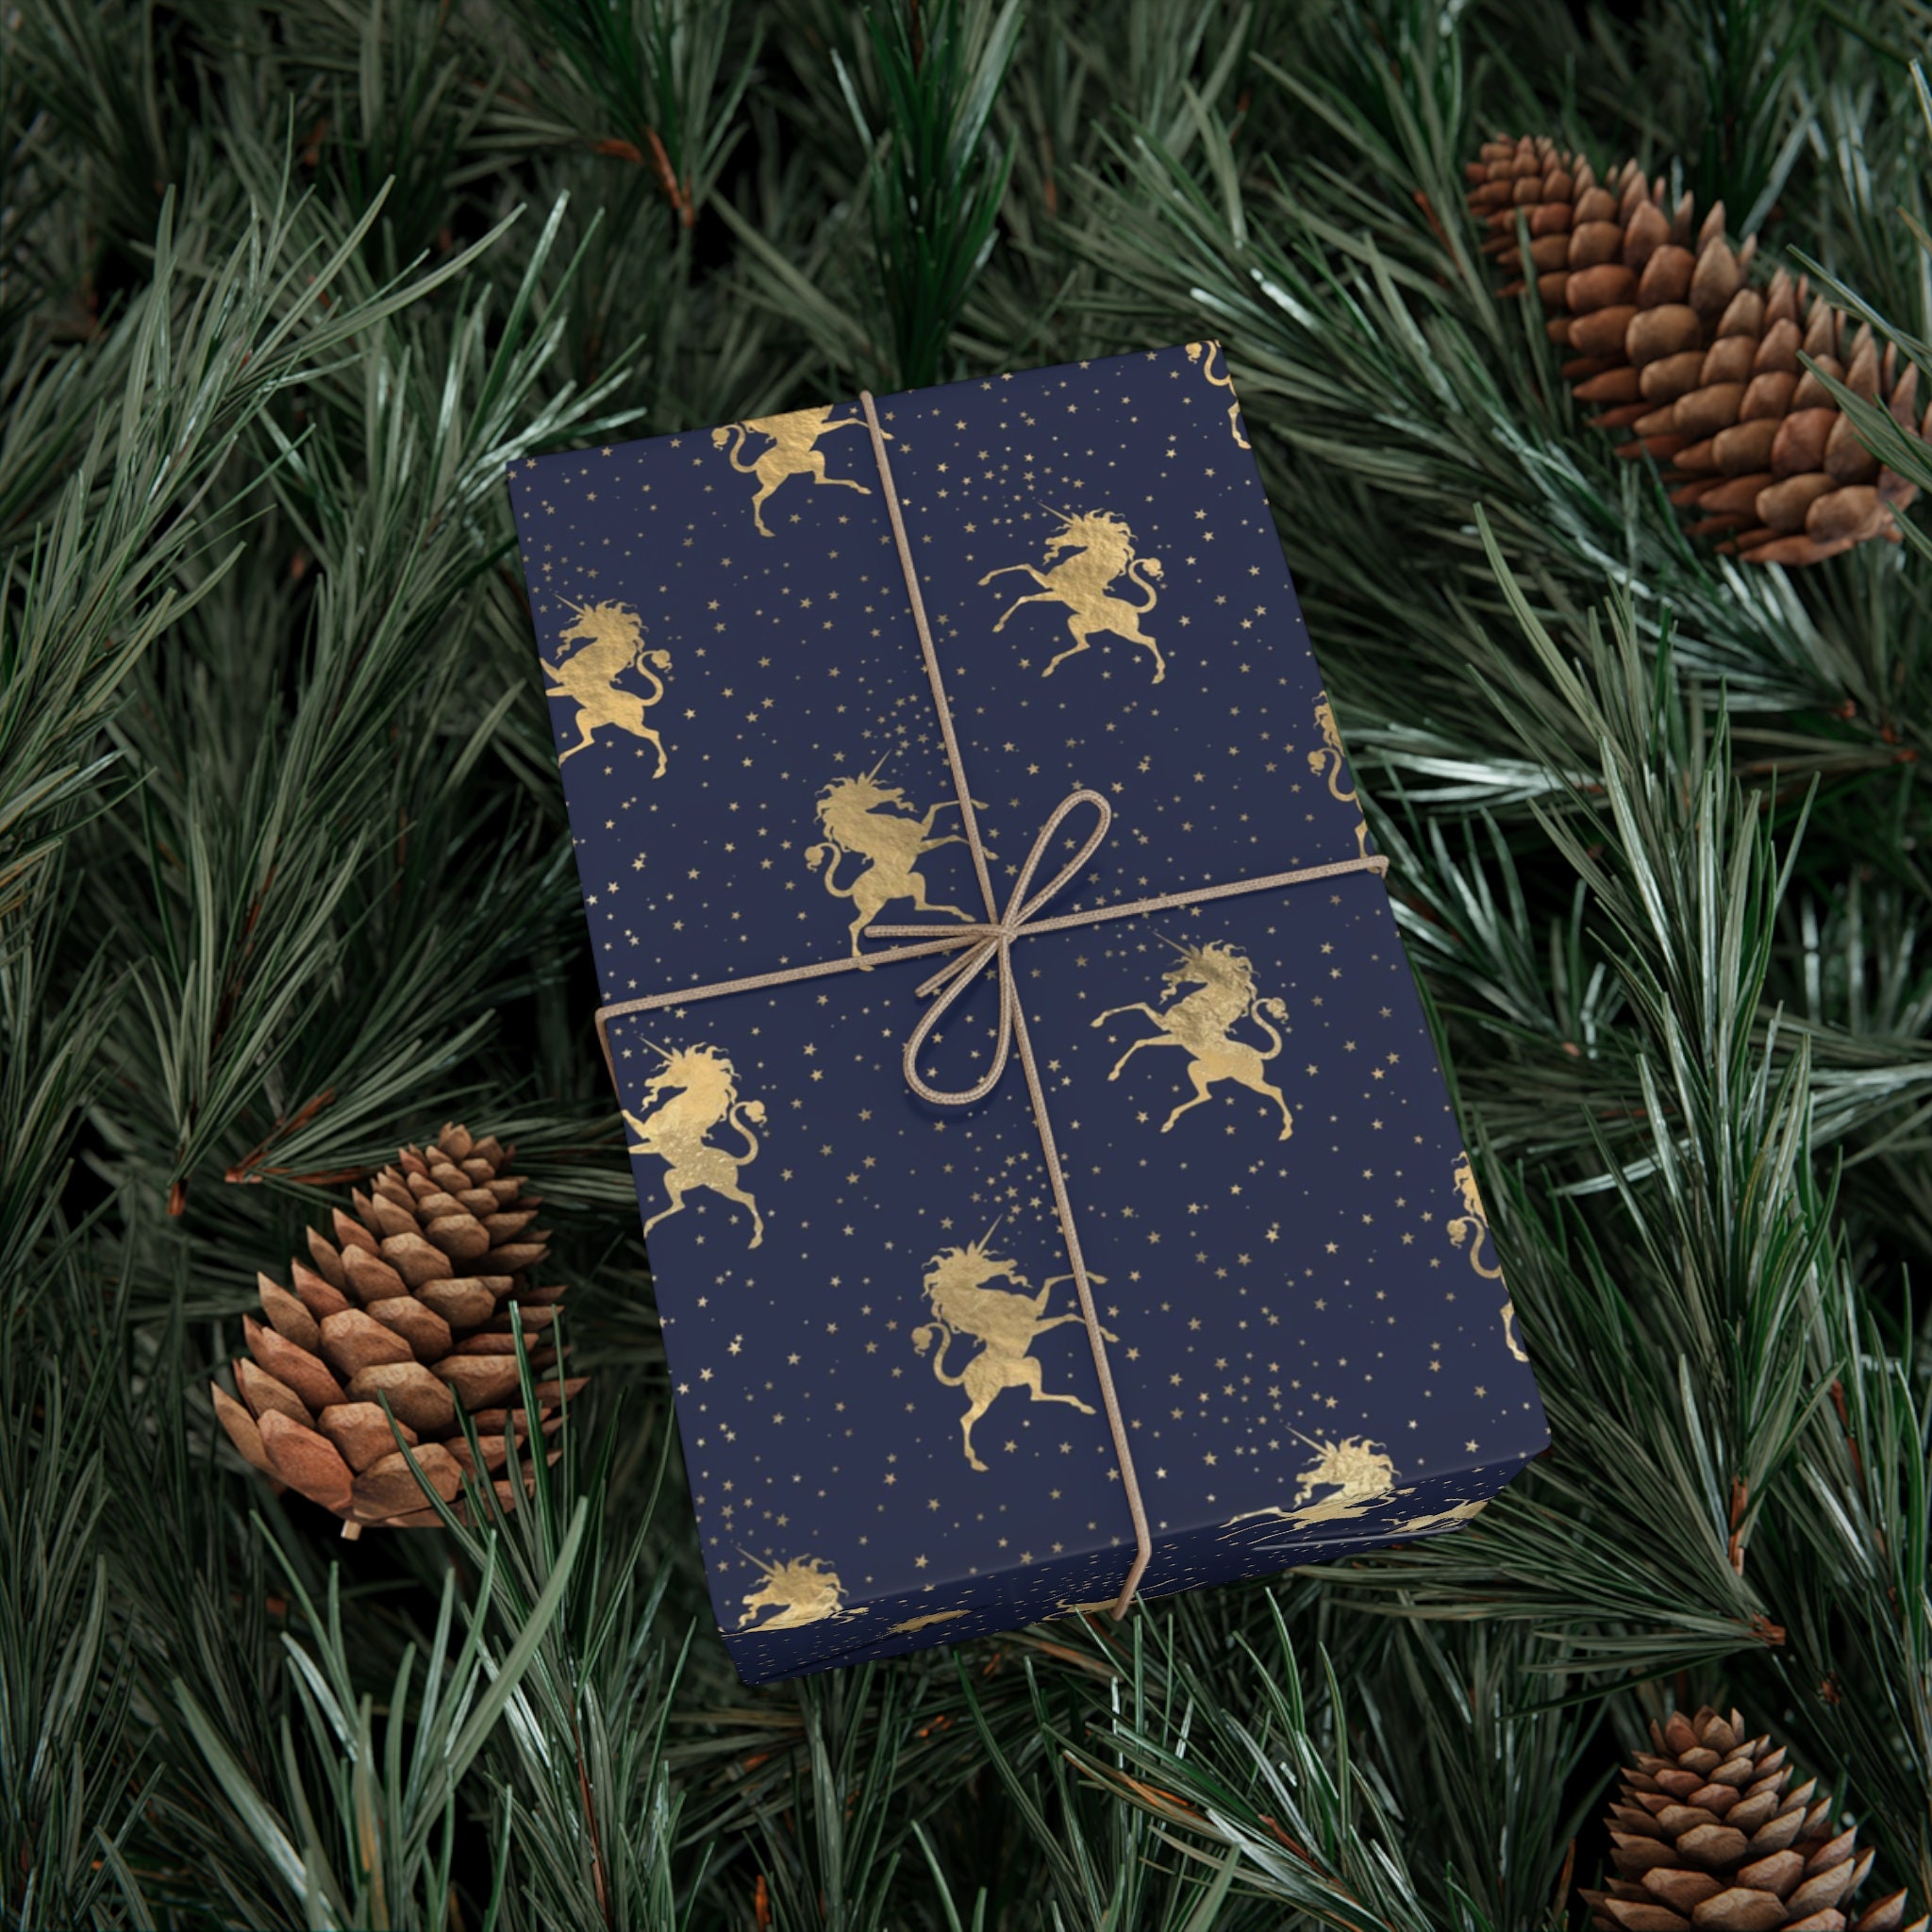 Gold & Black Geometric Design Gift Wrapping Paper-unique High Quality Size  A3 GP-290 